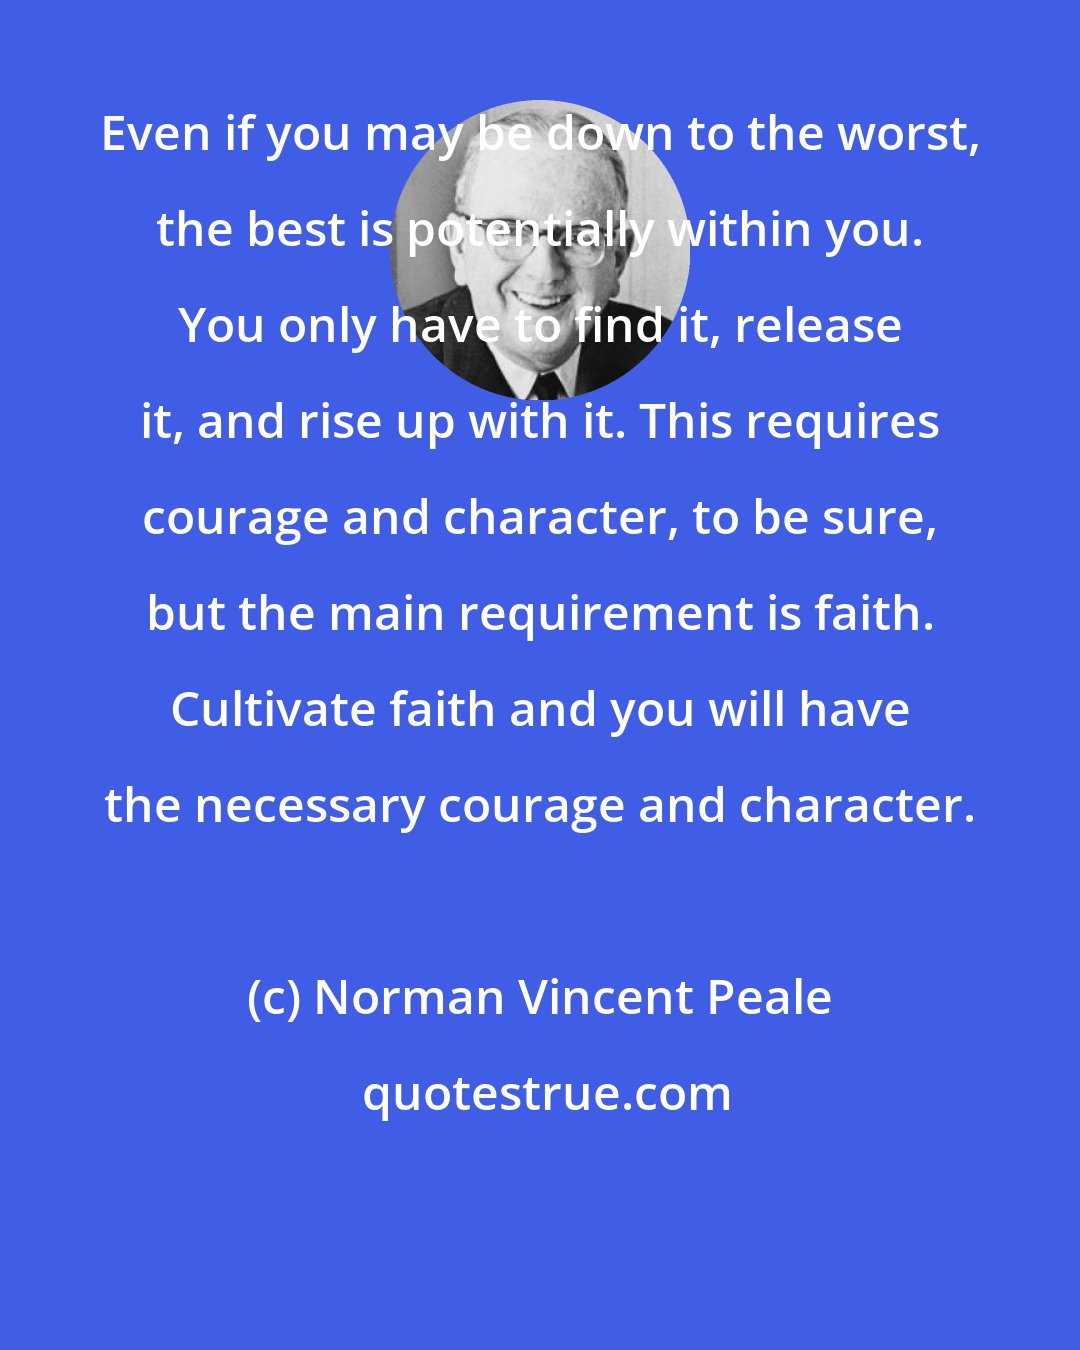 Norman Vincent Peale: Even if you may be down to the worst, the best is potentially within you. You only have to find it, release it, and rise up with it. This requires courage and character, to be sure, but the main requirement is faith. Cultivate faith and you will have the necessary courage and character.